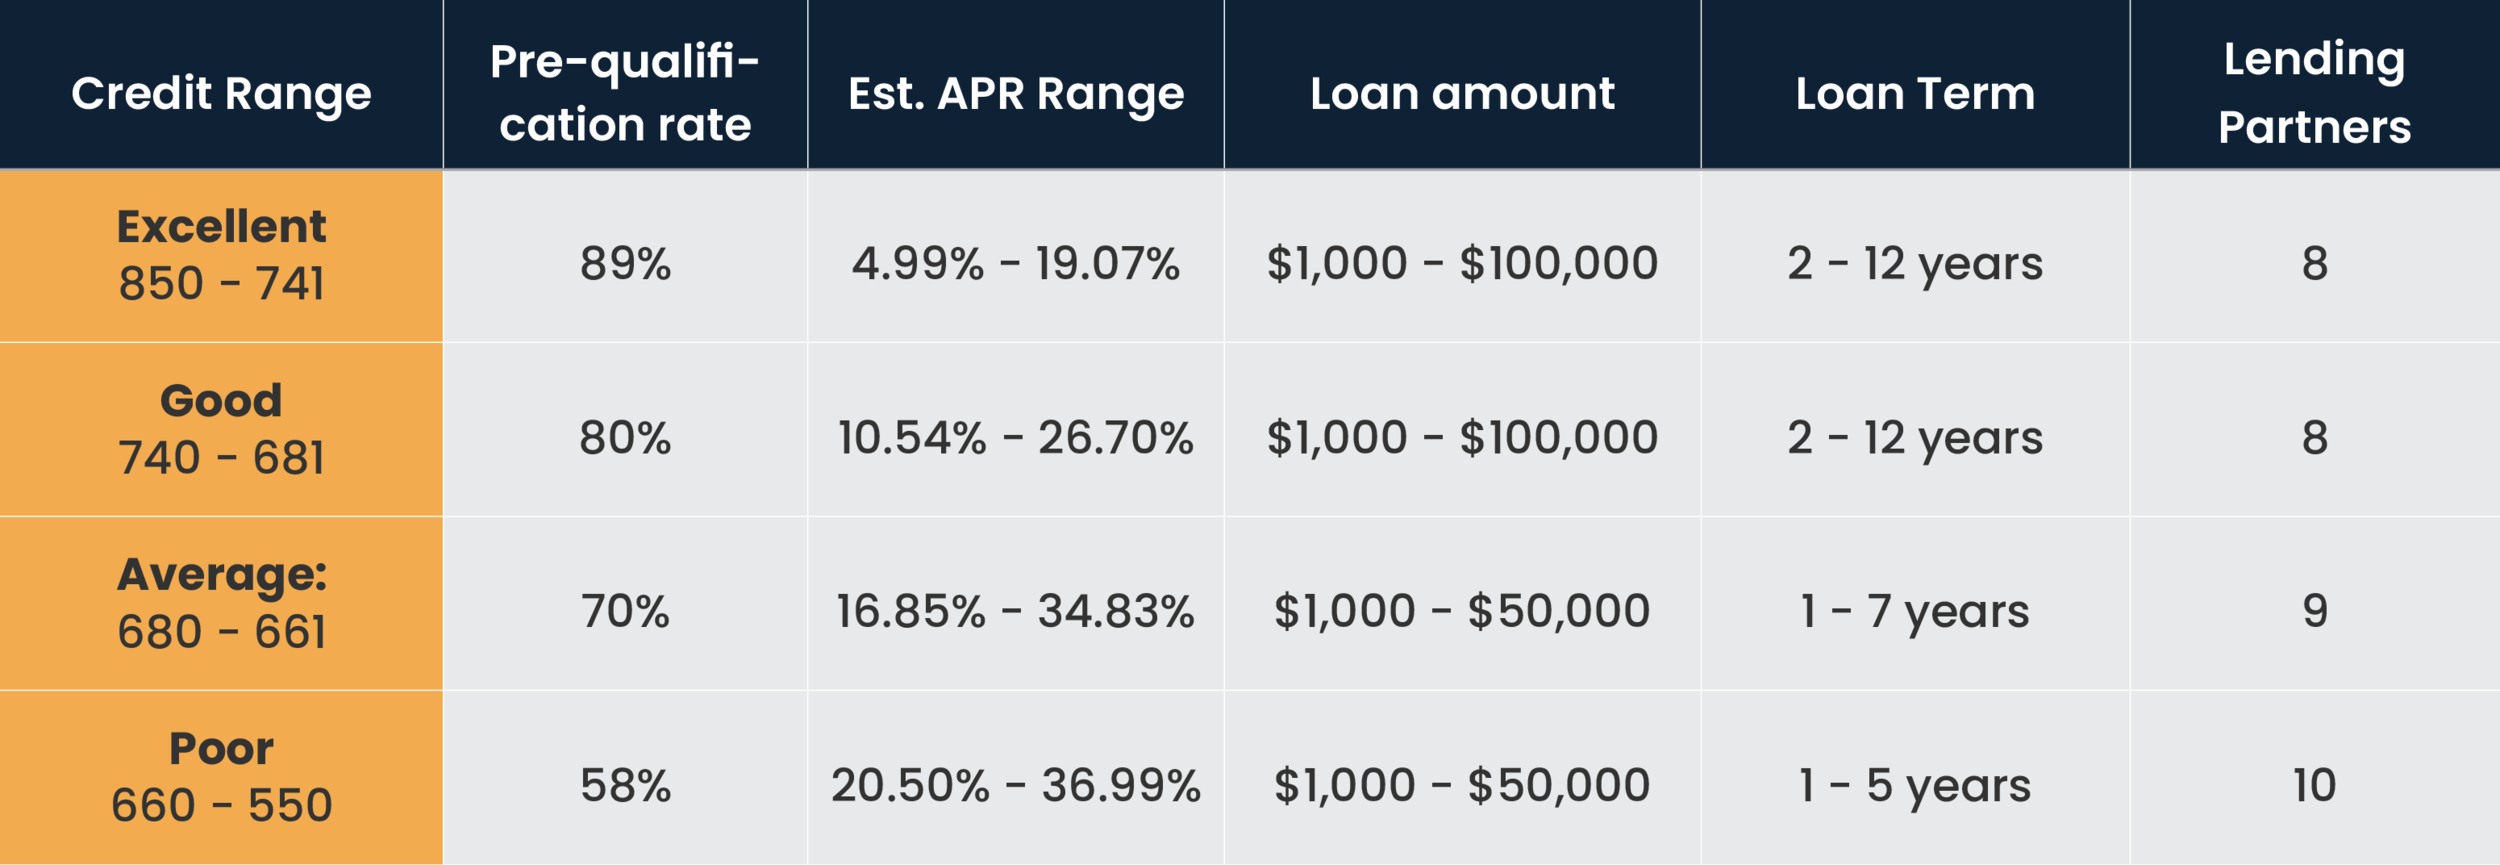 *For each self-reported credit score range, pre-qualification rate is calculated by dividing the number of pre-qualified Hearth users by the total number of users who submitted a loan request.**For pre-qualified Hearth users with this credit score range, Hearth’s lending partners returned loan options with this range of minimum APRs for the 65% of pre-qualified users with minimum APRs between the 10th and 75th percentiles.All loan information is presented without warranty, and estimated APR and other terms are not binding. Hearth’s lending partners generally present a range of APRs (for instance, from 5% to 35.99%) with a range of terms and monthly payments. As an example, a $10,000 loan with an APR of 14.50% and a term of 36 months would have a monthly payment of $344.21. Actual APRs will depend on factors like credit score, requested loan amount, loan term, and credit history. Only borrowers with excellent credit will qualify for the lowest APRs. All loans are subject to credit review and approval.Hearth is a technology company, which is licensed as a broker as may be required by state law. NMLS ID# 1628533 | NMLS Consumer Access. Hearth does not accept applications for credit, does not make loans, and does not make credit decisions; this site does not constitute an offer or solicitation to lend. All insurance services are provided by Hearth Home Insurance Solutions, Inc. Hearth may be compensated by third-party advertisers.